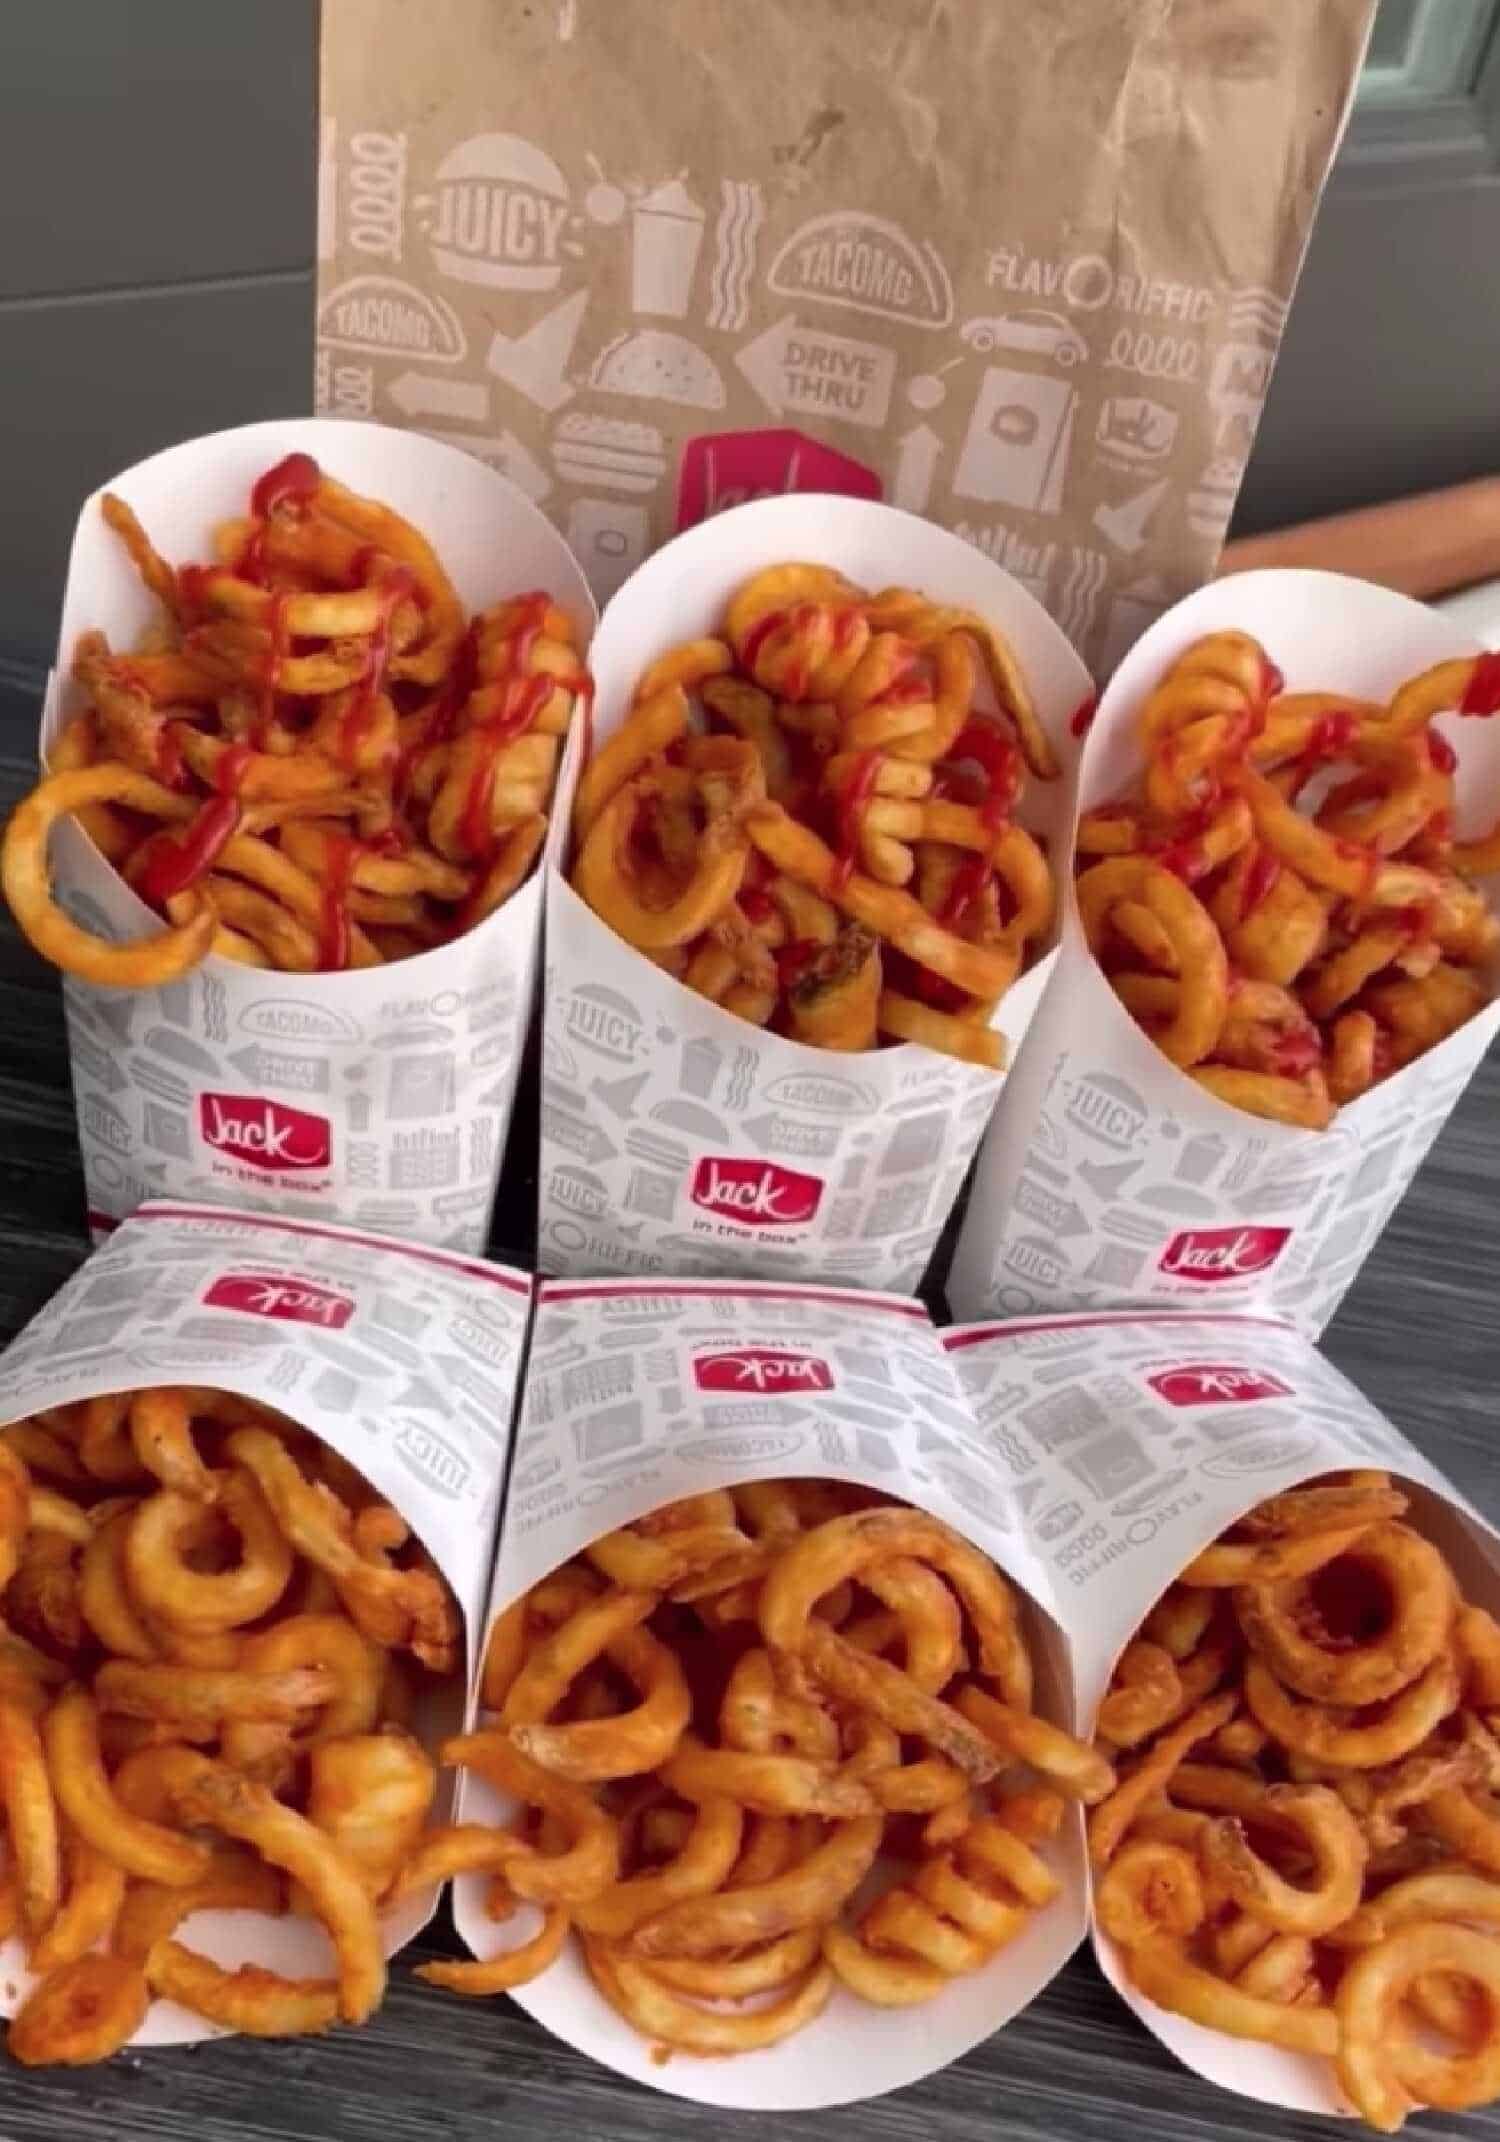 Six white boxes of Jack in the Box curly fries (some with ketchup) next to a brown take out bag from the restaurant.